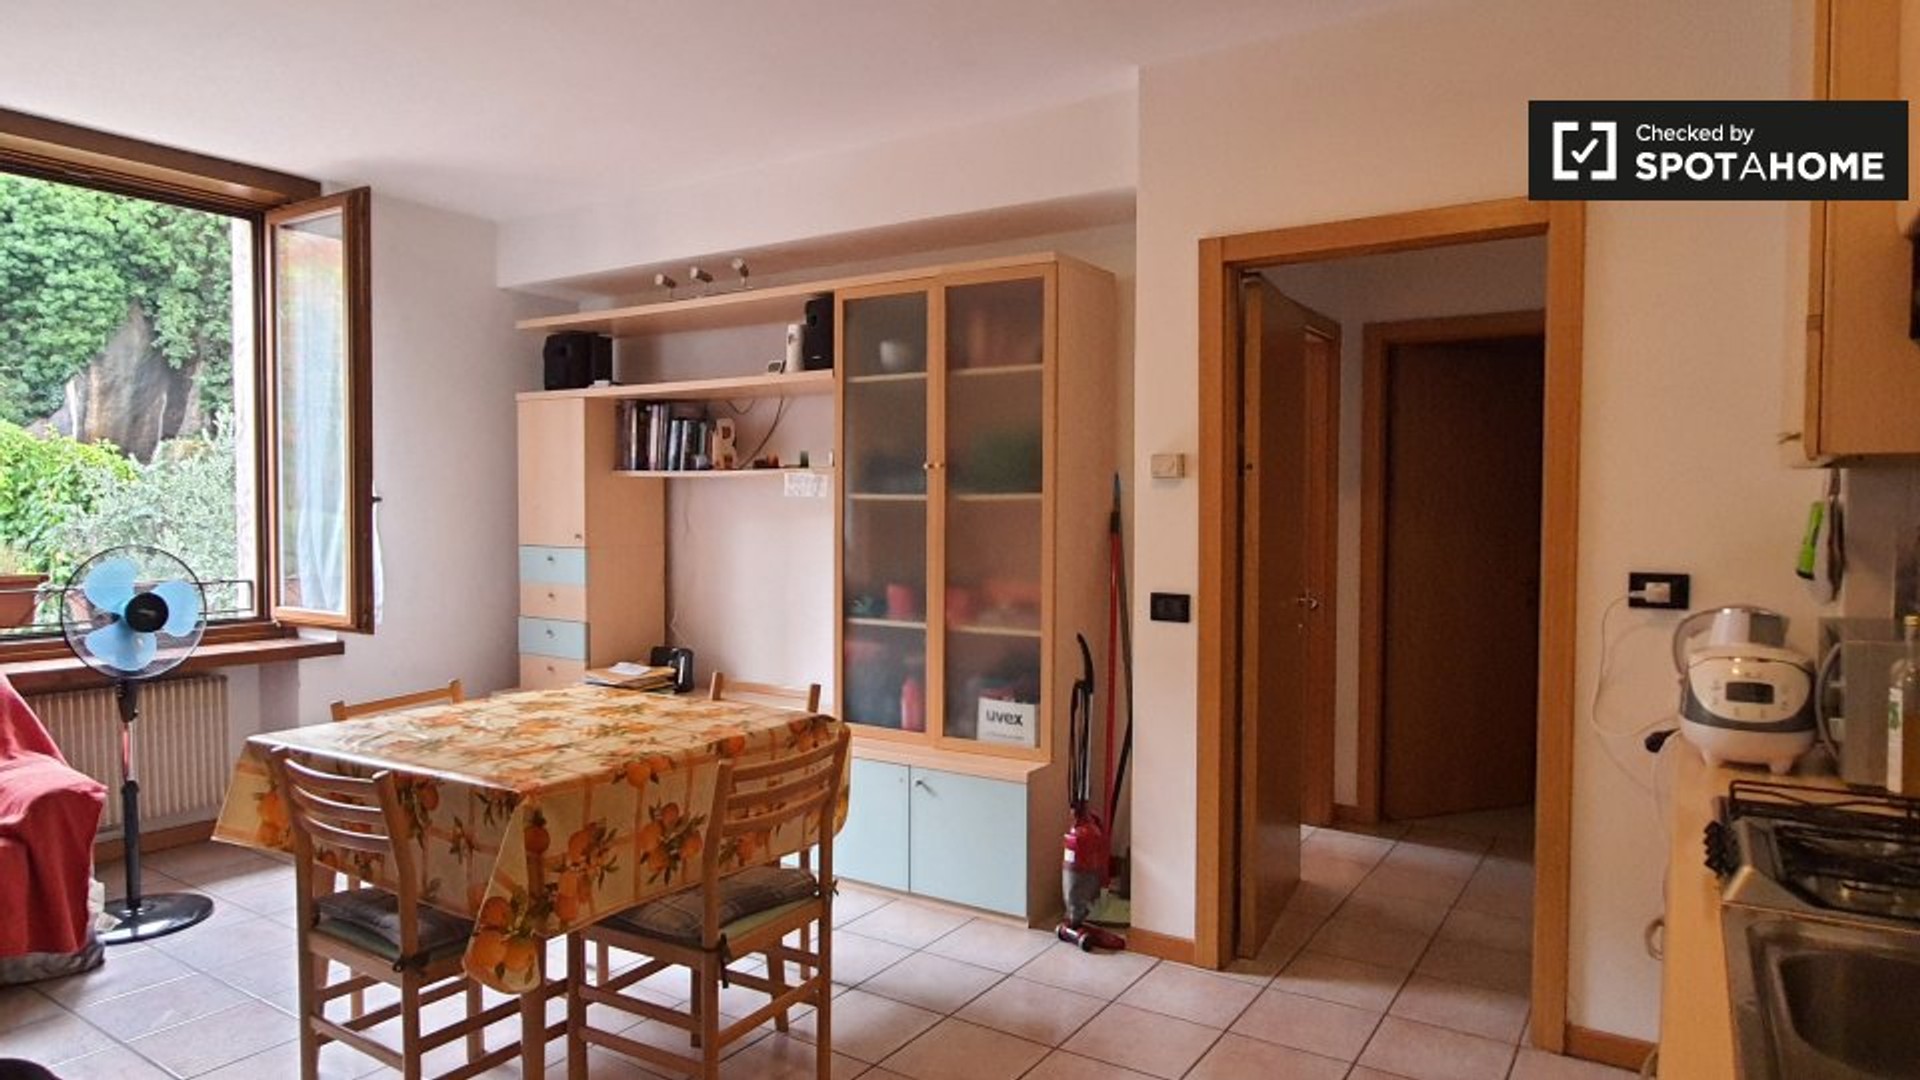 Entire fully furnished flat in Trento